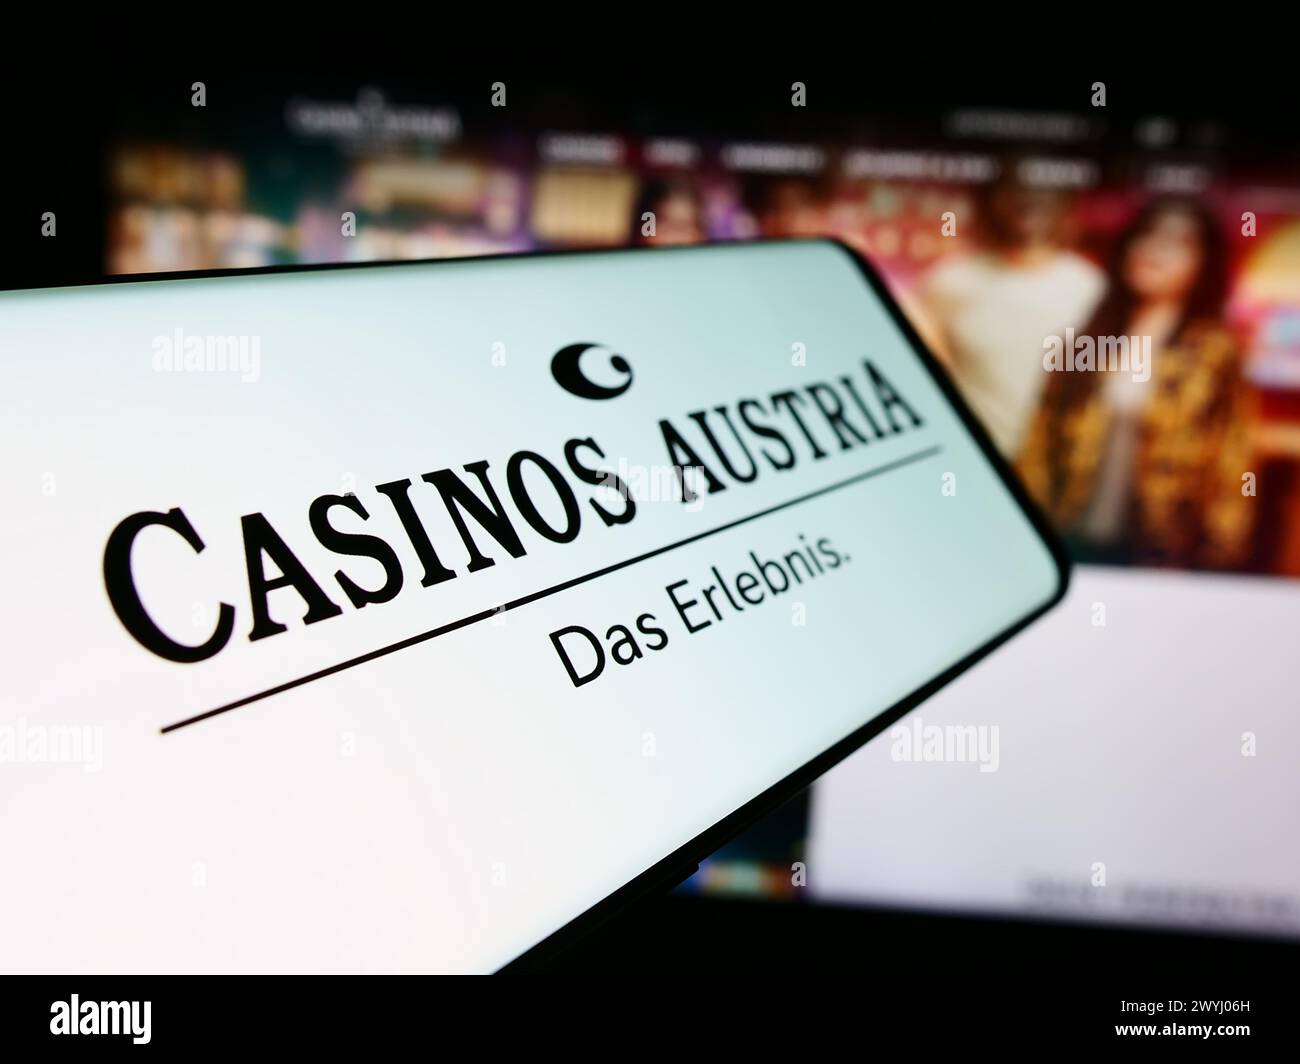 Mobile phone with logo of Austrian gambling company Casinos Austria AG in front of business website. Focus on center-left of phone display. Stock Photo